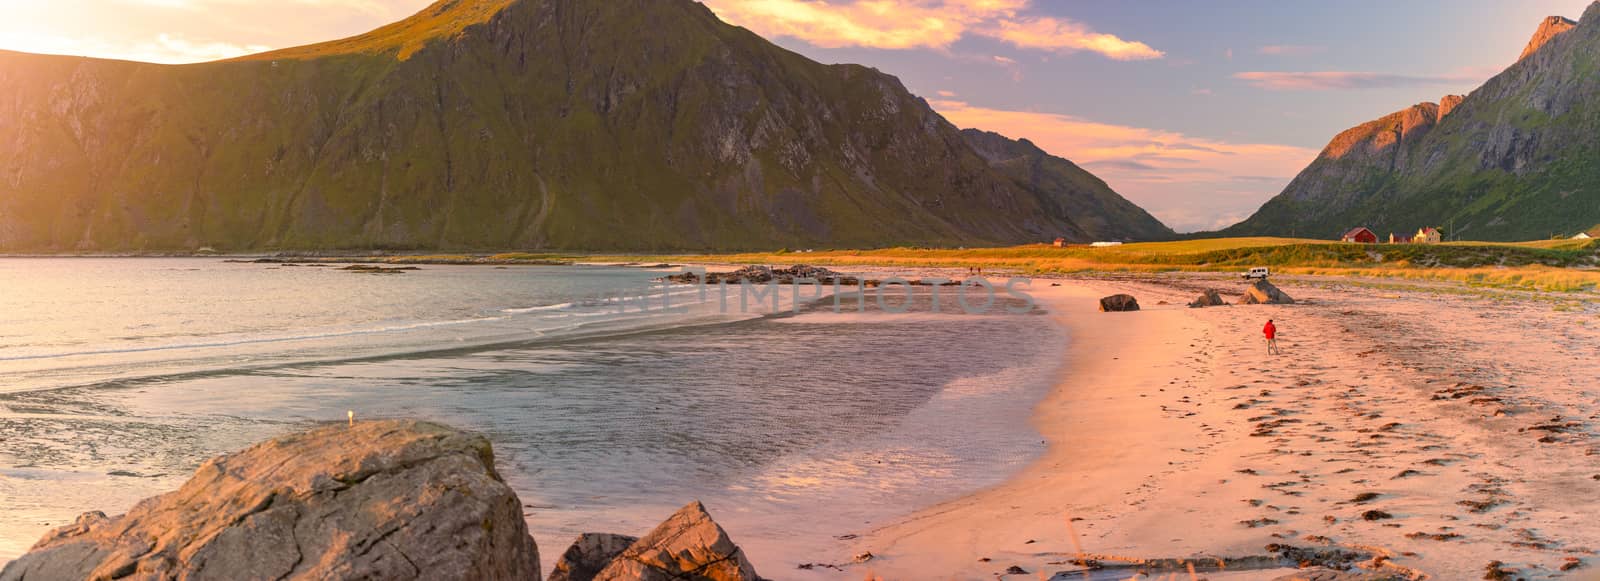 Landscape at sunset with beach and mountains. Purple sky in background. Travel in Norway, Scandinavia, Europe.